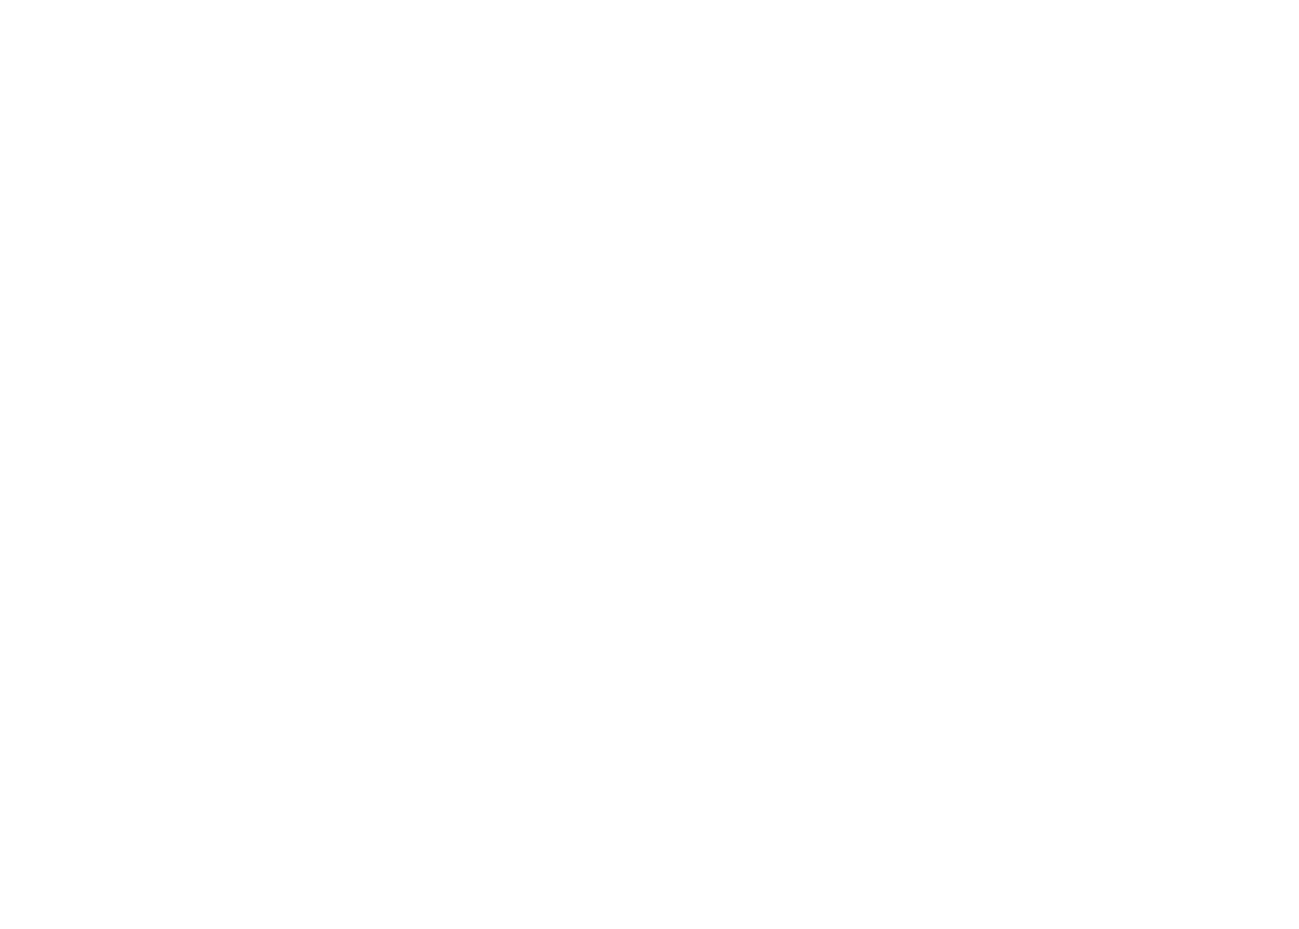 The grant provided an opportunity to develop students’ financial literacy, as students researched products they wishe...